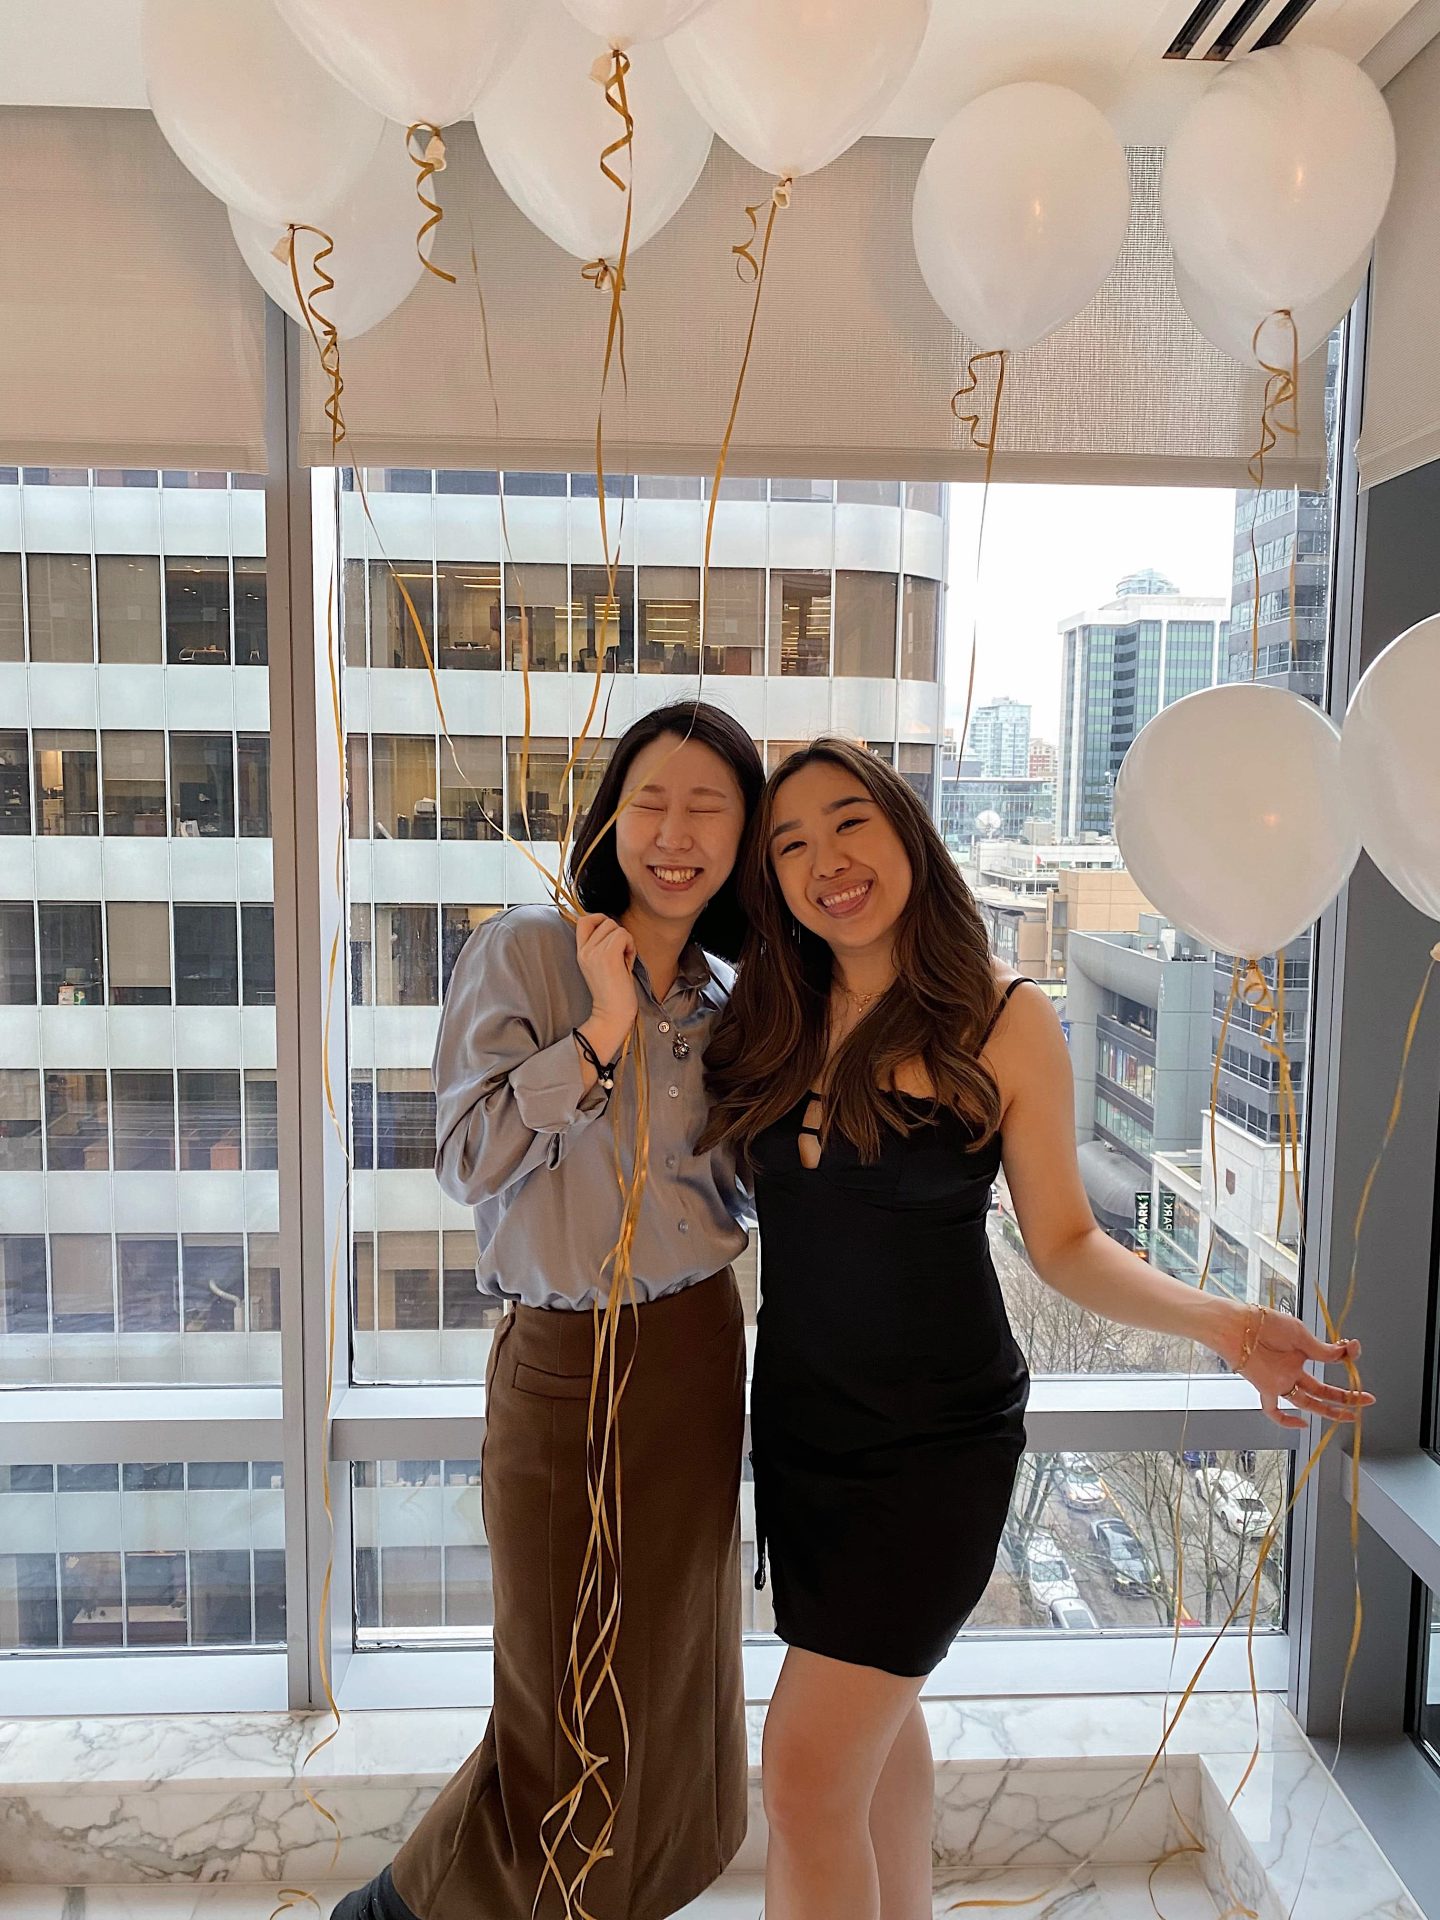 Giving my bridesmaid a hug during my bridesmaid proposal posing with our balloons